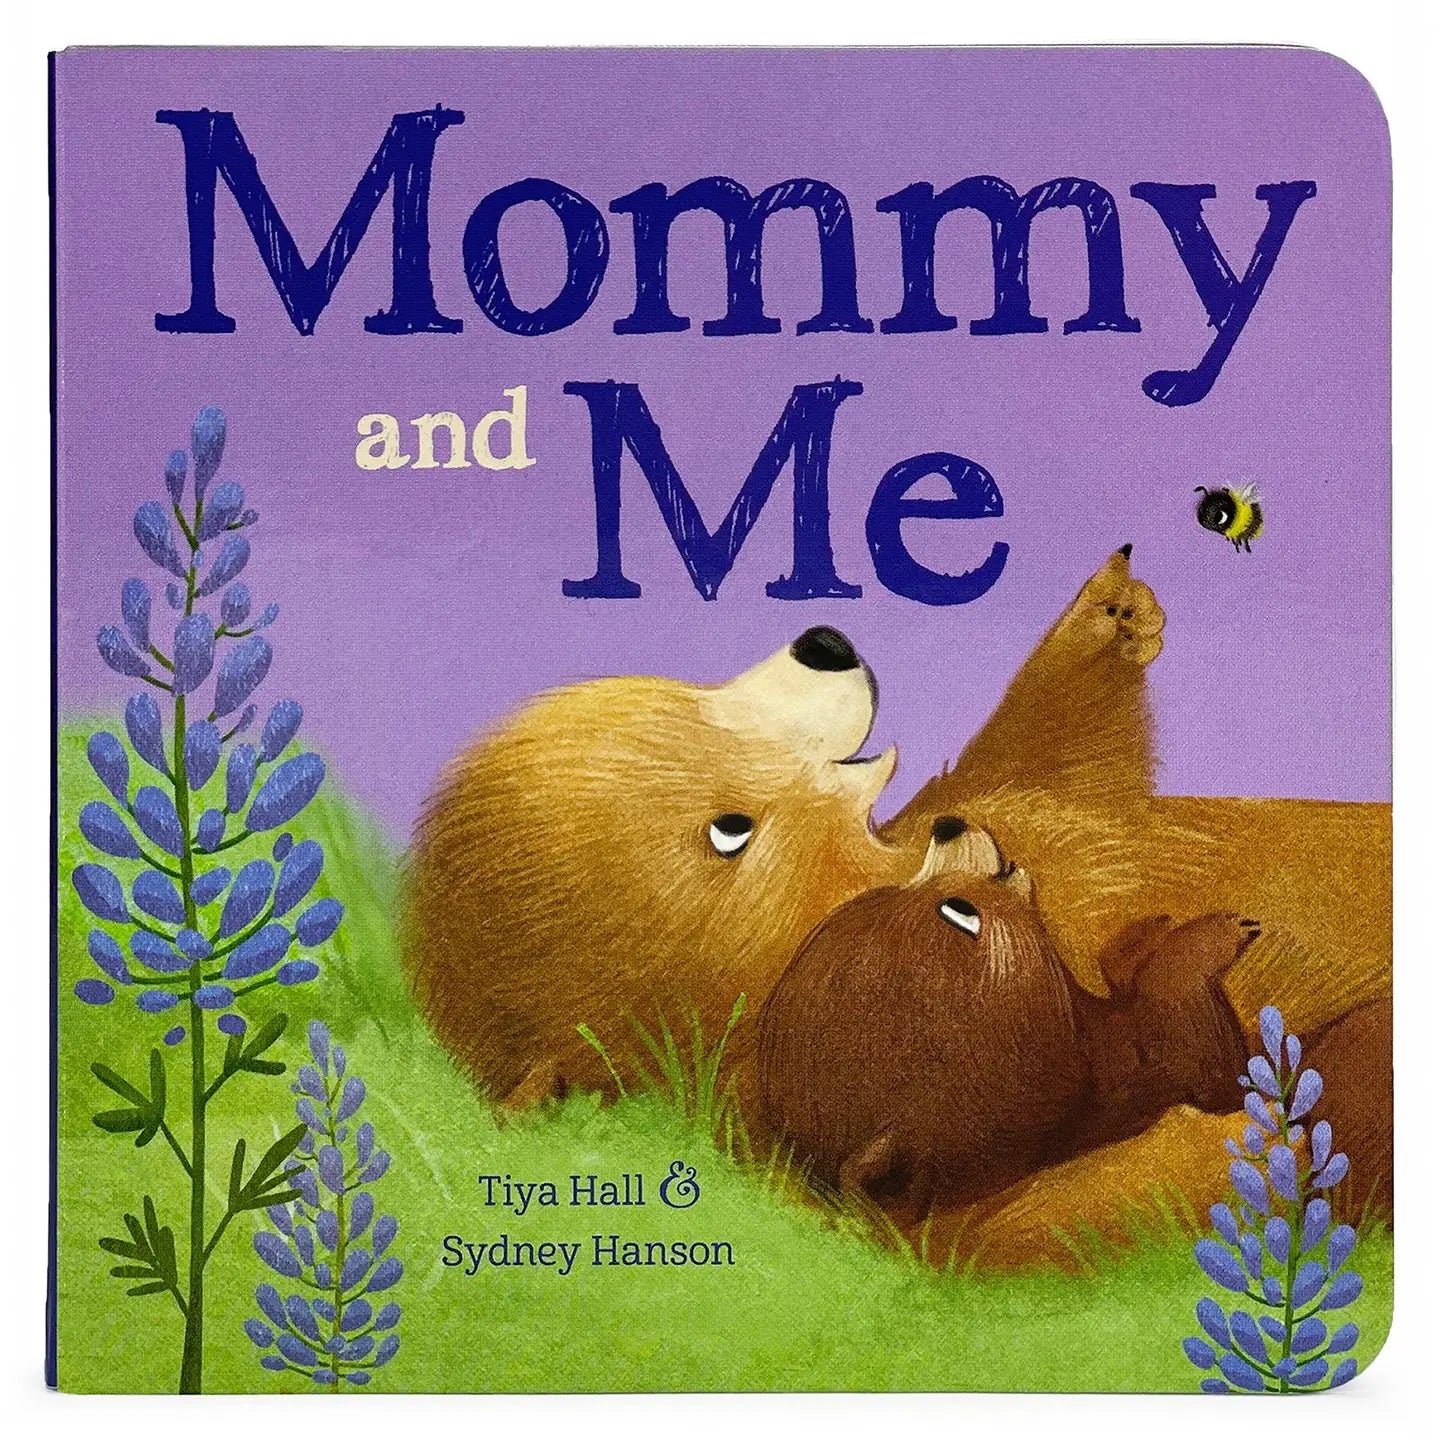 Mommy and Me Board Book